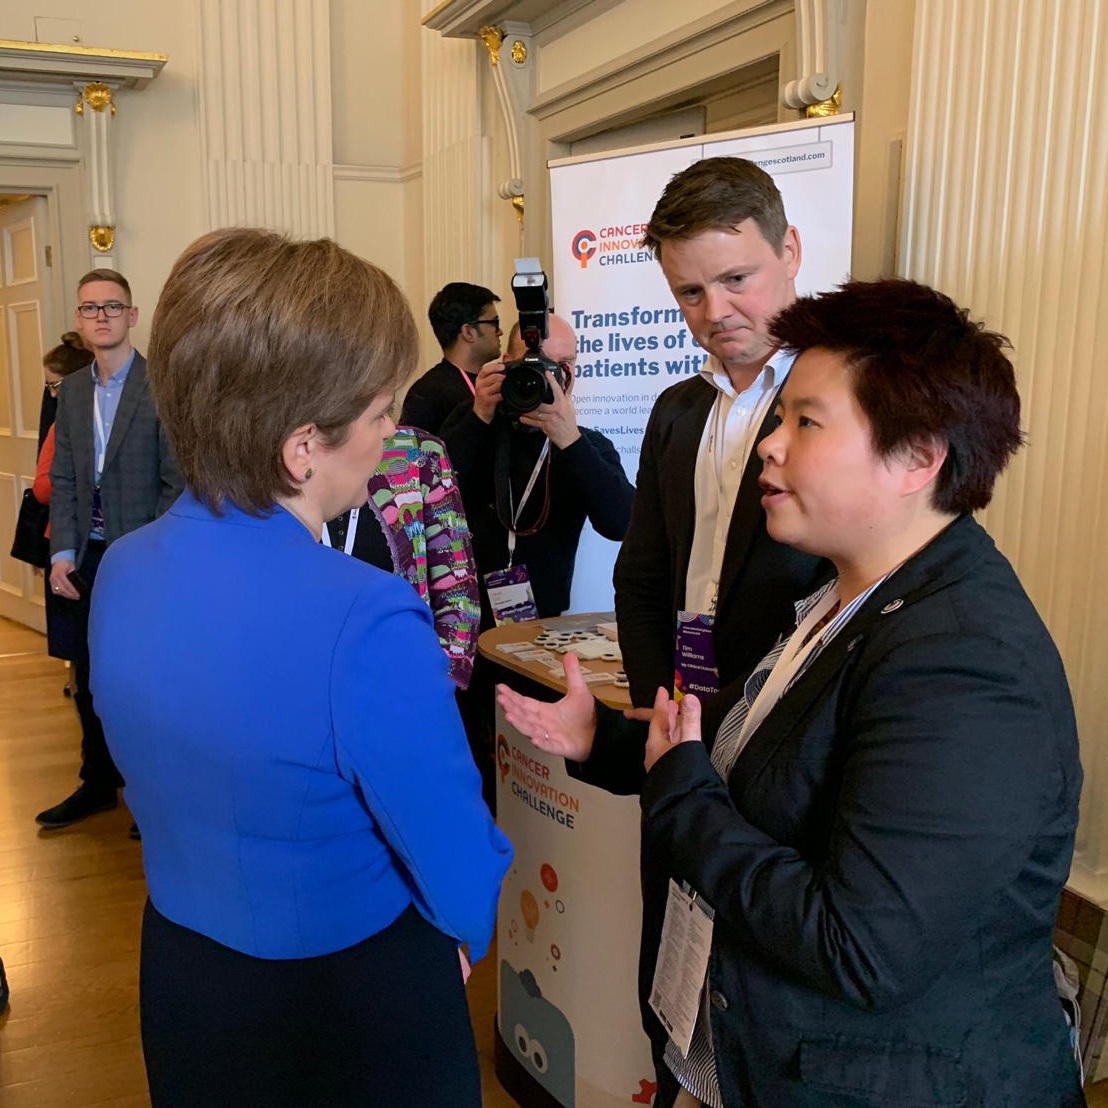 Discussing our work on the Cancer Innovation Challenge with the First Minister, Nicola Sturgeon, at Data Fest.